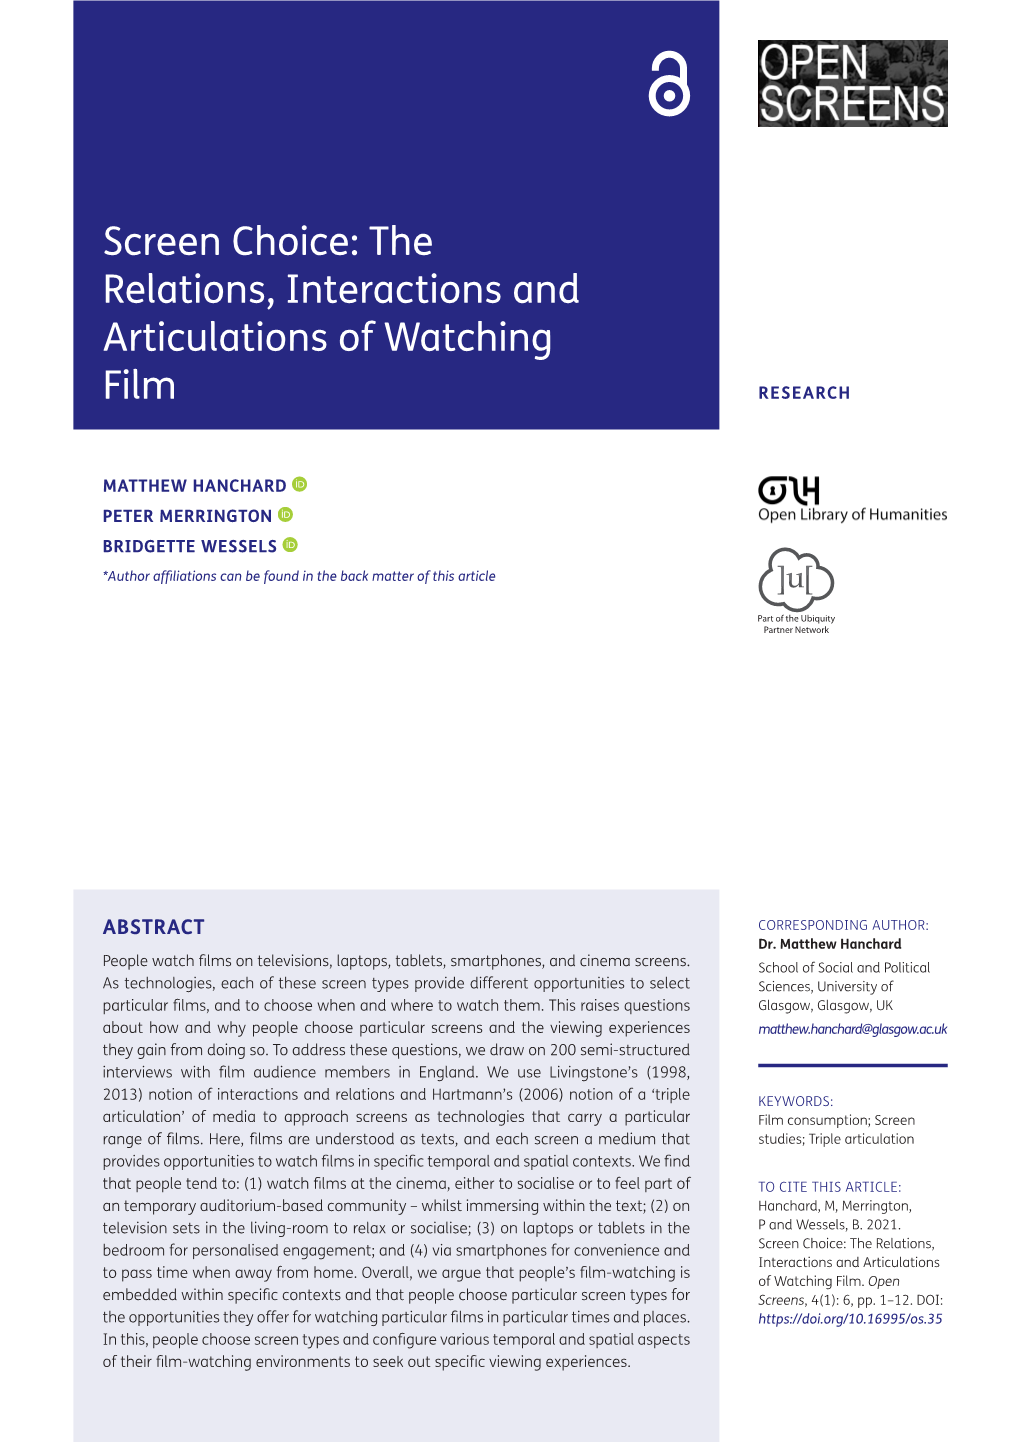 The Relations, Interactions and Articulations of Watching Film